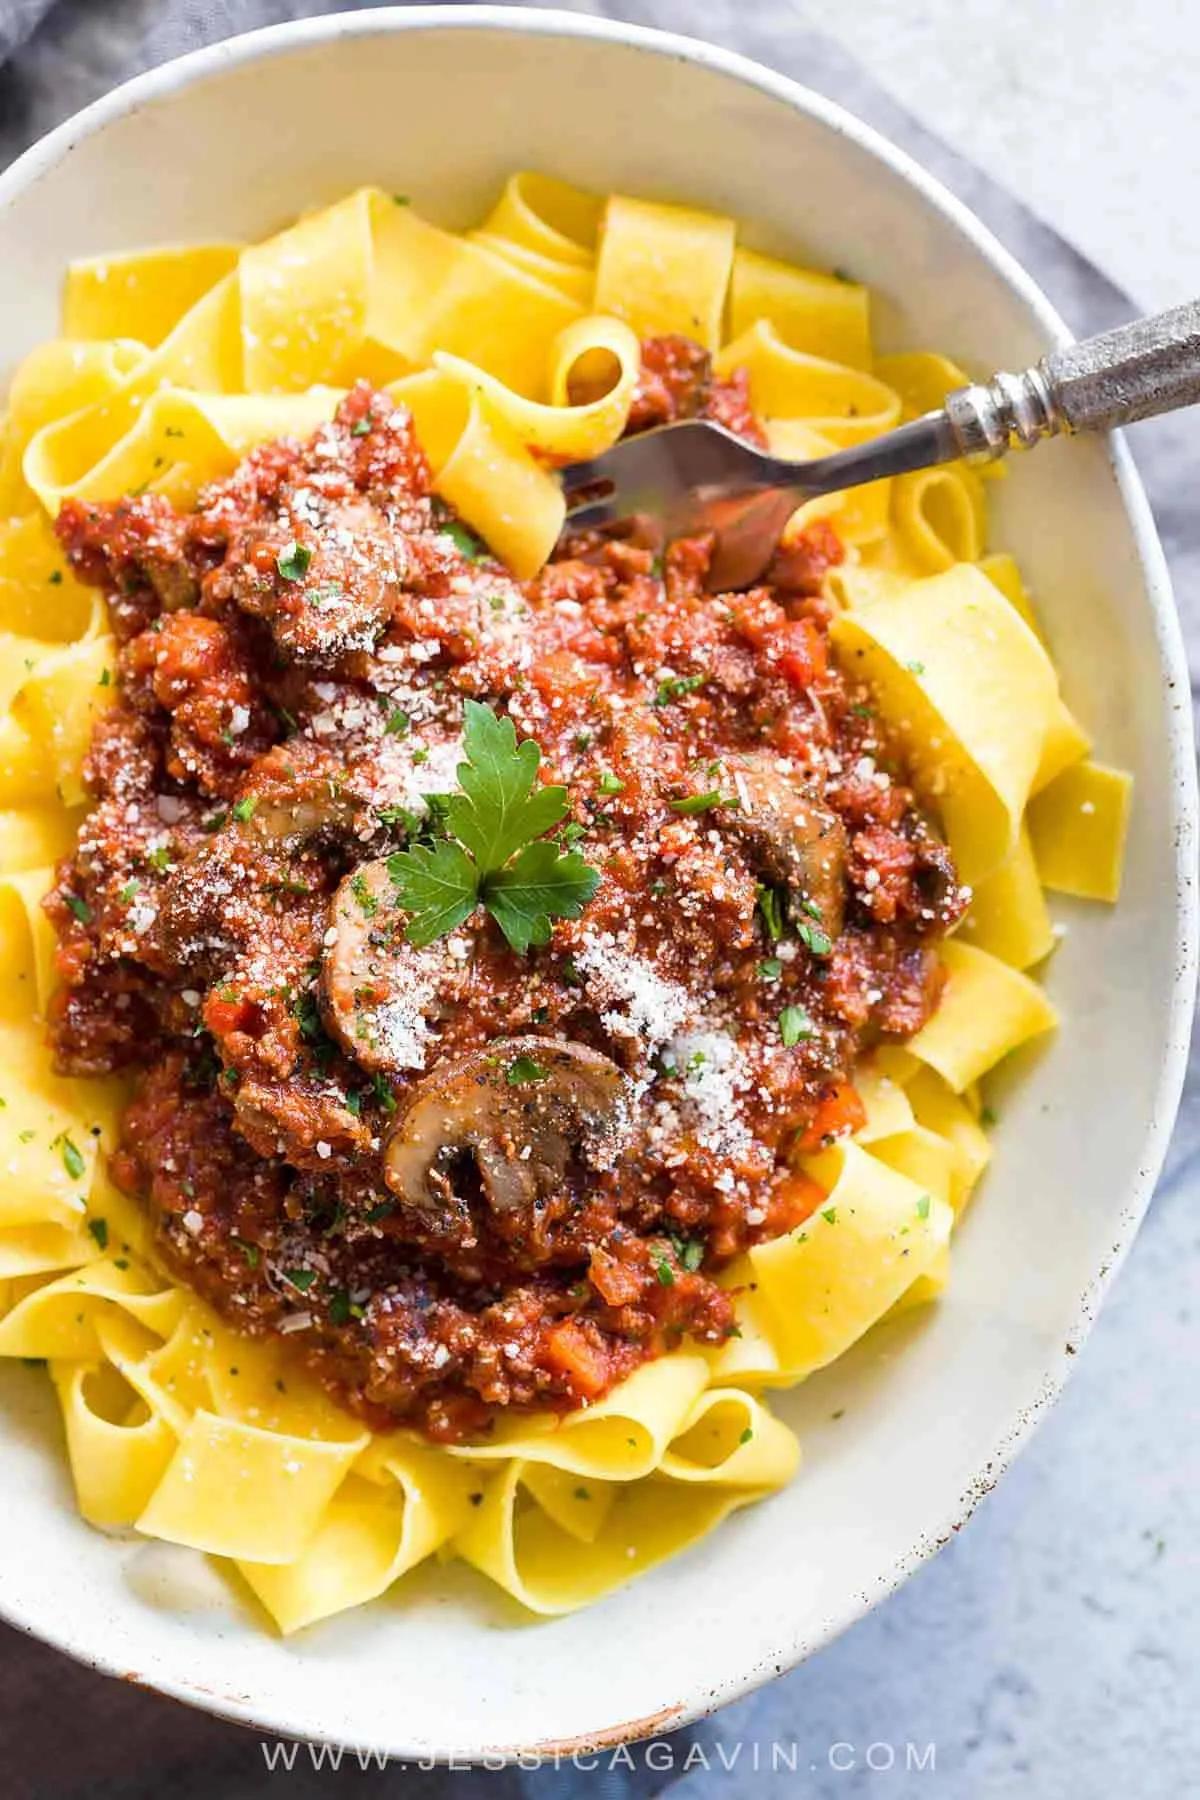 Beef Bolognese Sauce with Pappardelle Pasta - Jessica Gavin